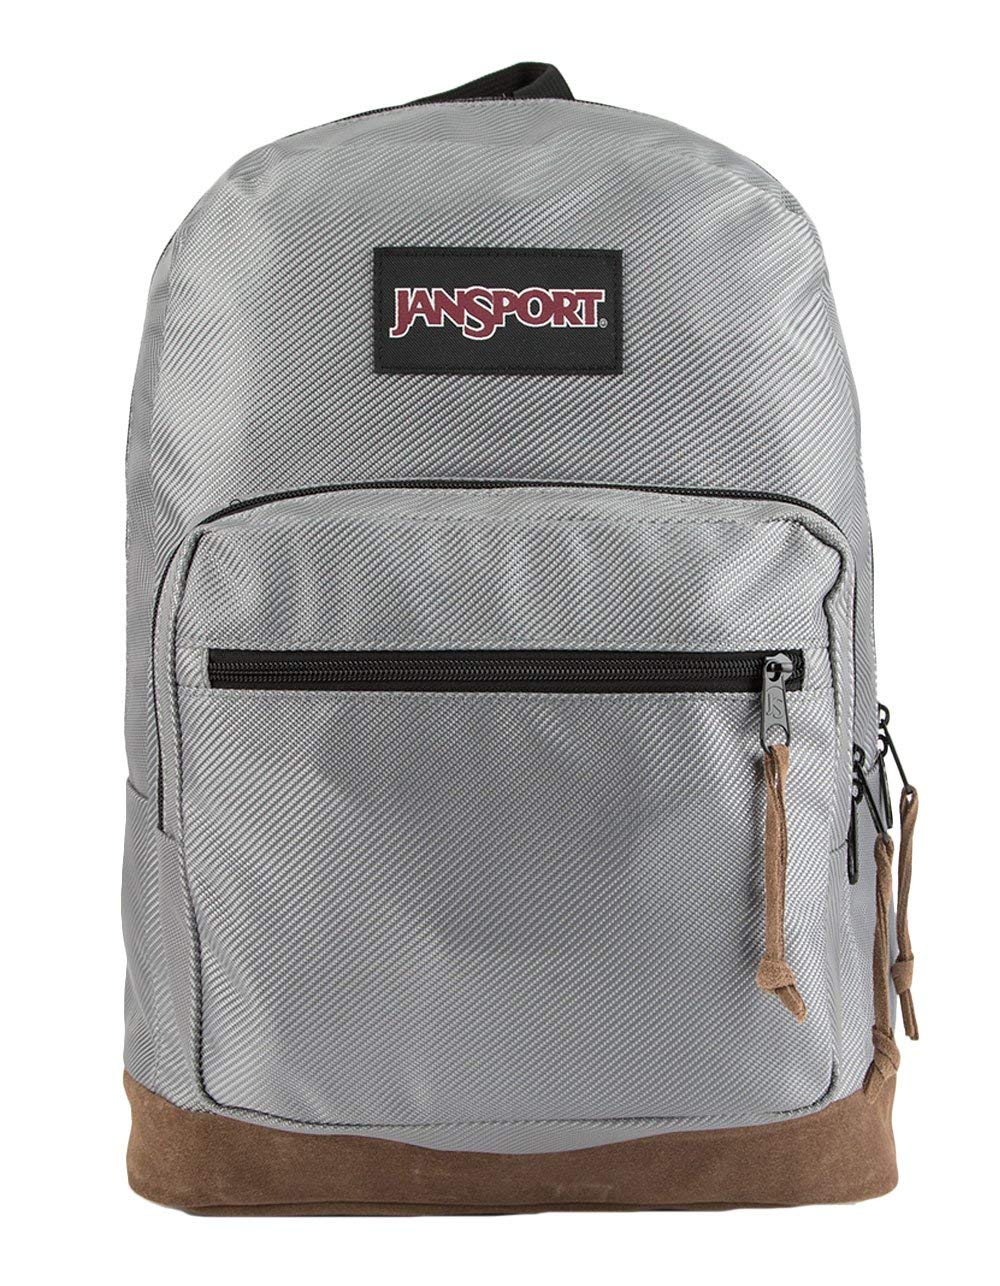 JanSport Right Pack Digital Edition Laptop Backpack - Silver Metallic Weave - JS00T58T4H1 - (Open Box)